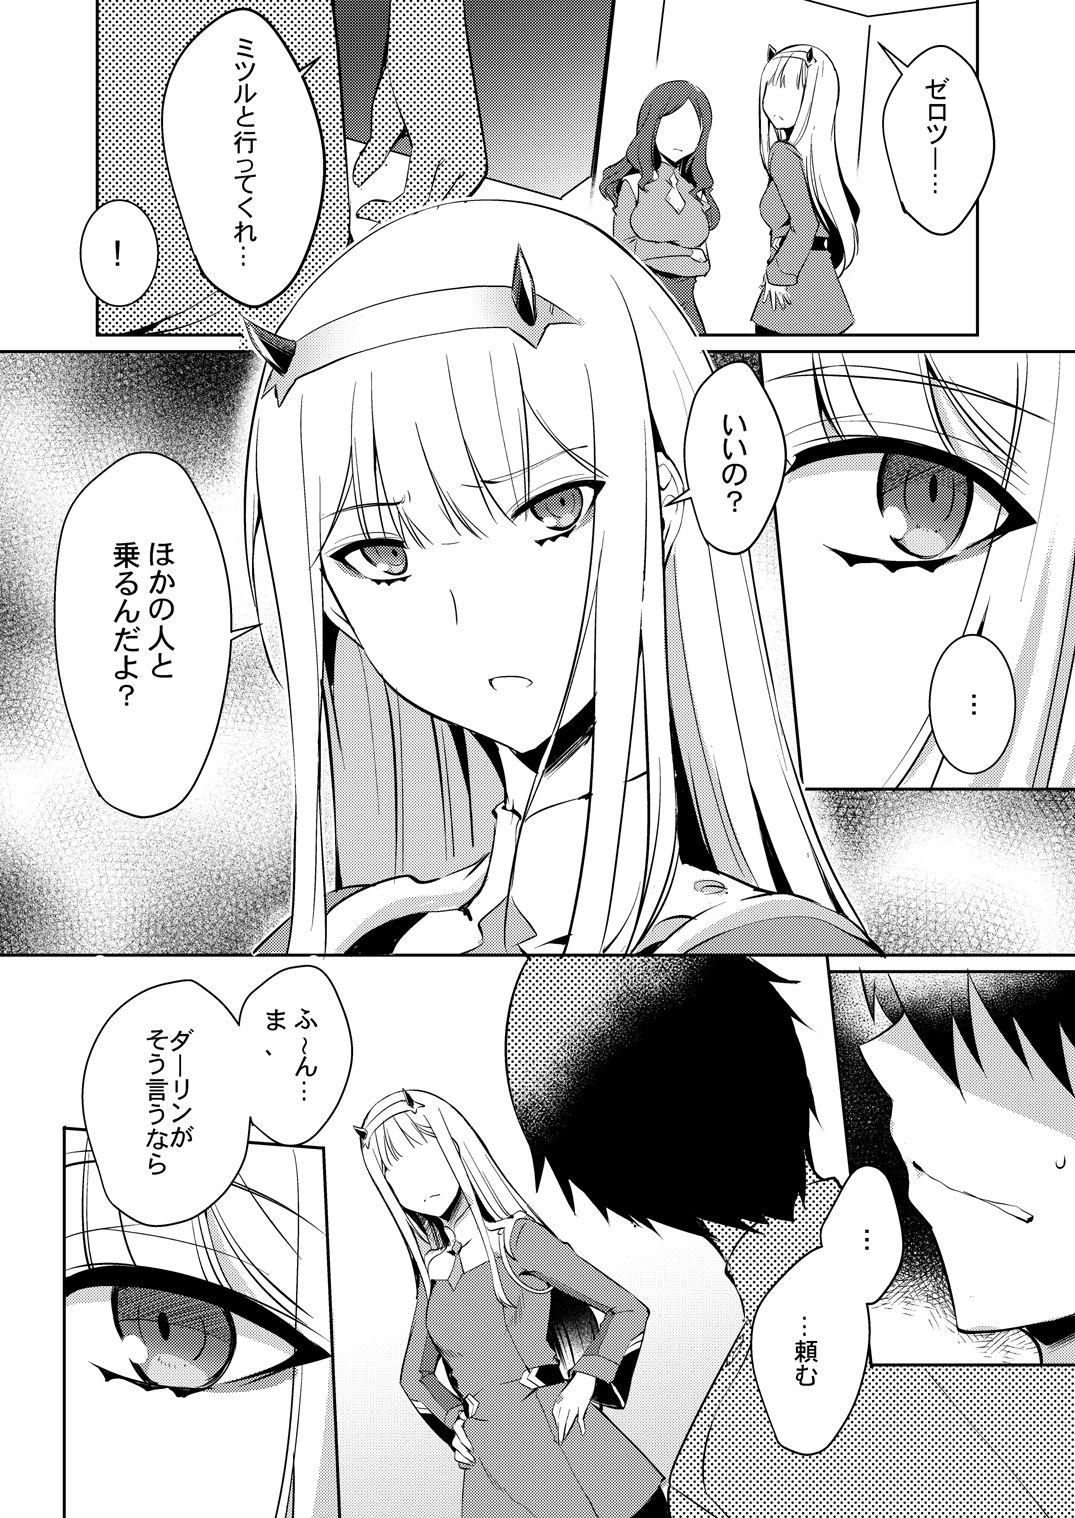 Gaping Mitsuru in the Zero Two - Darling in the franxx Viet Nam - Page 6